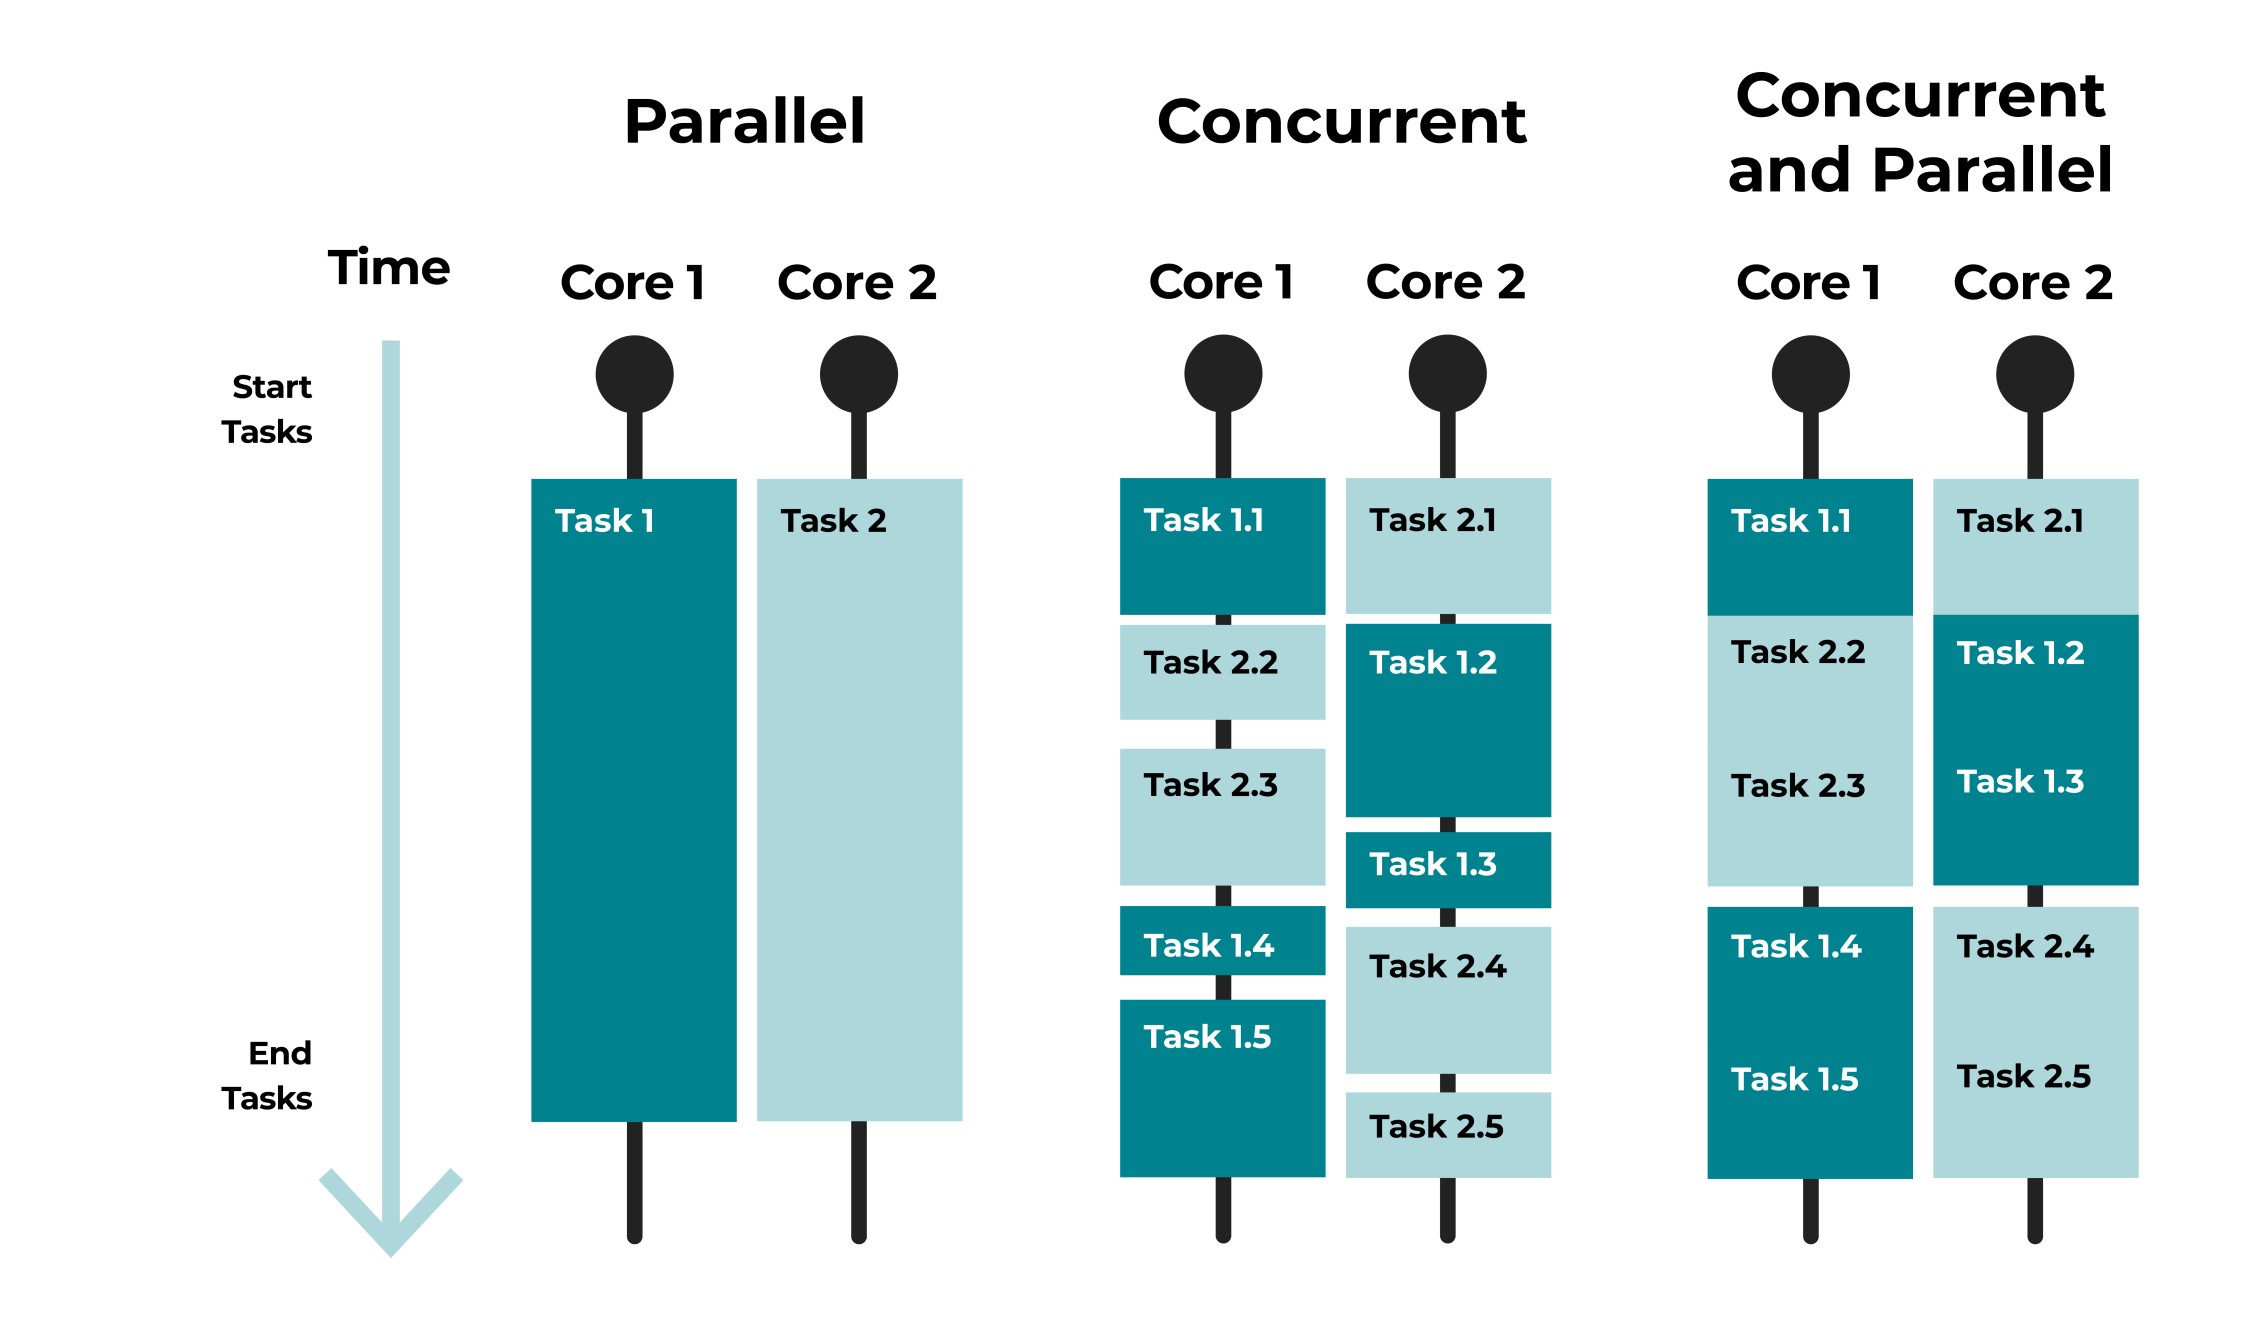 Parallel Execution runs multiple tasks at the same time. Concurrent execution runs multiple tasks in chunks. Concurrent execution can be parallel by not the other way around!